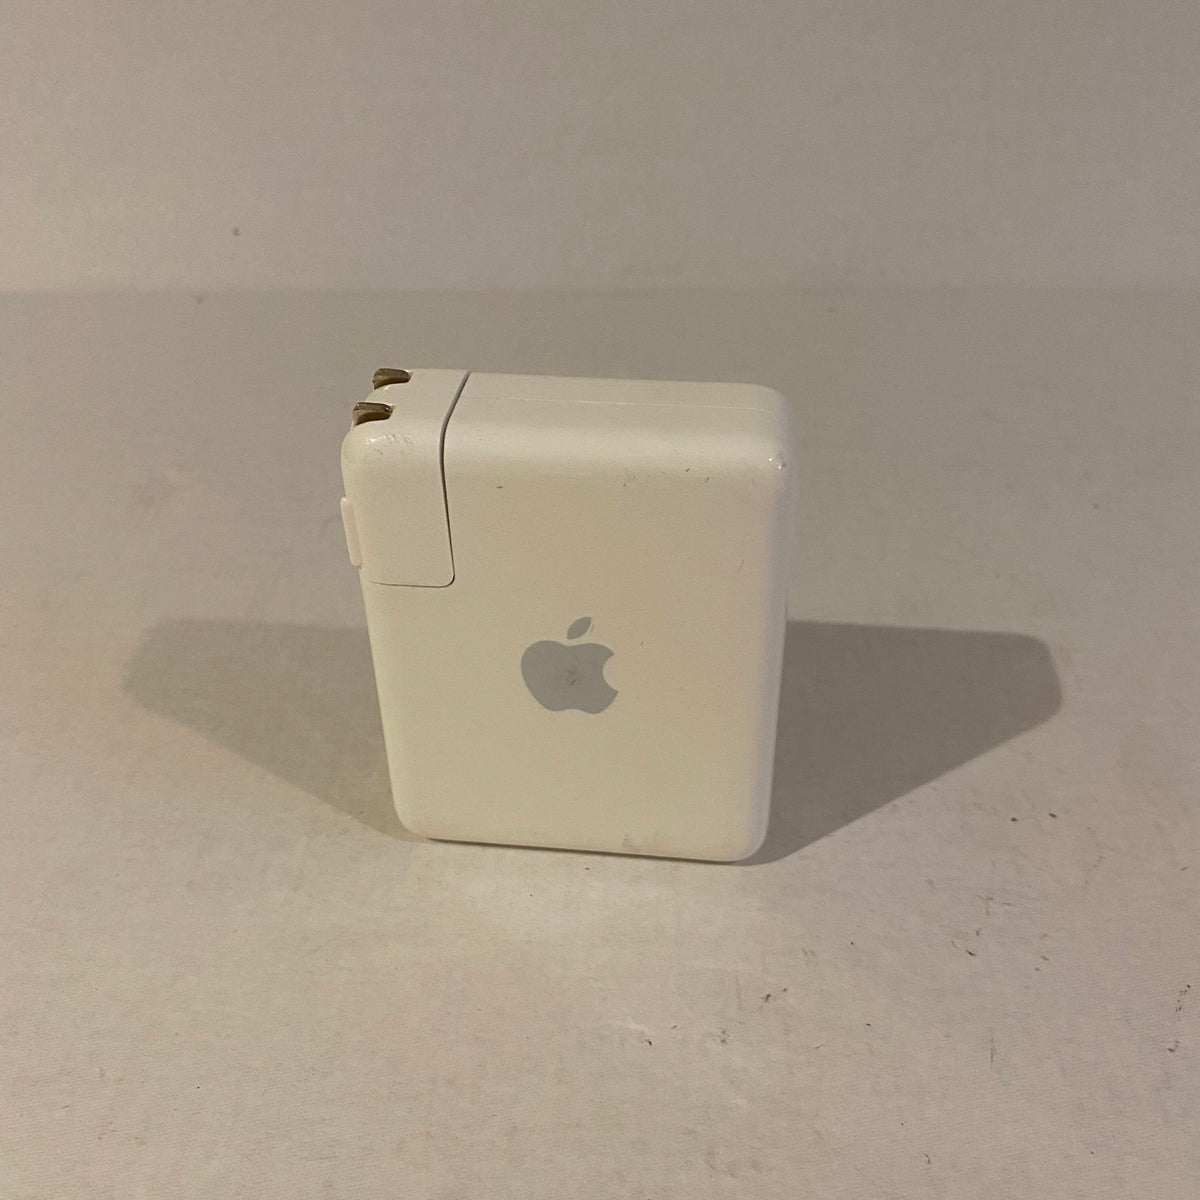 airport express base station a1264